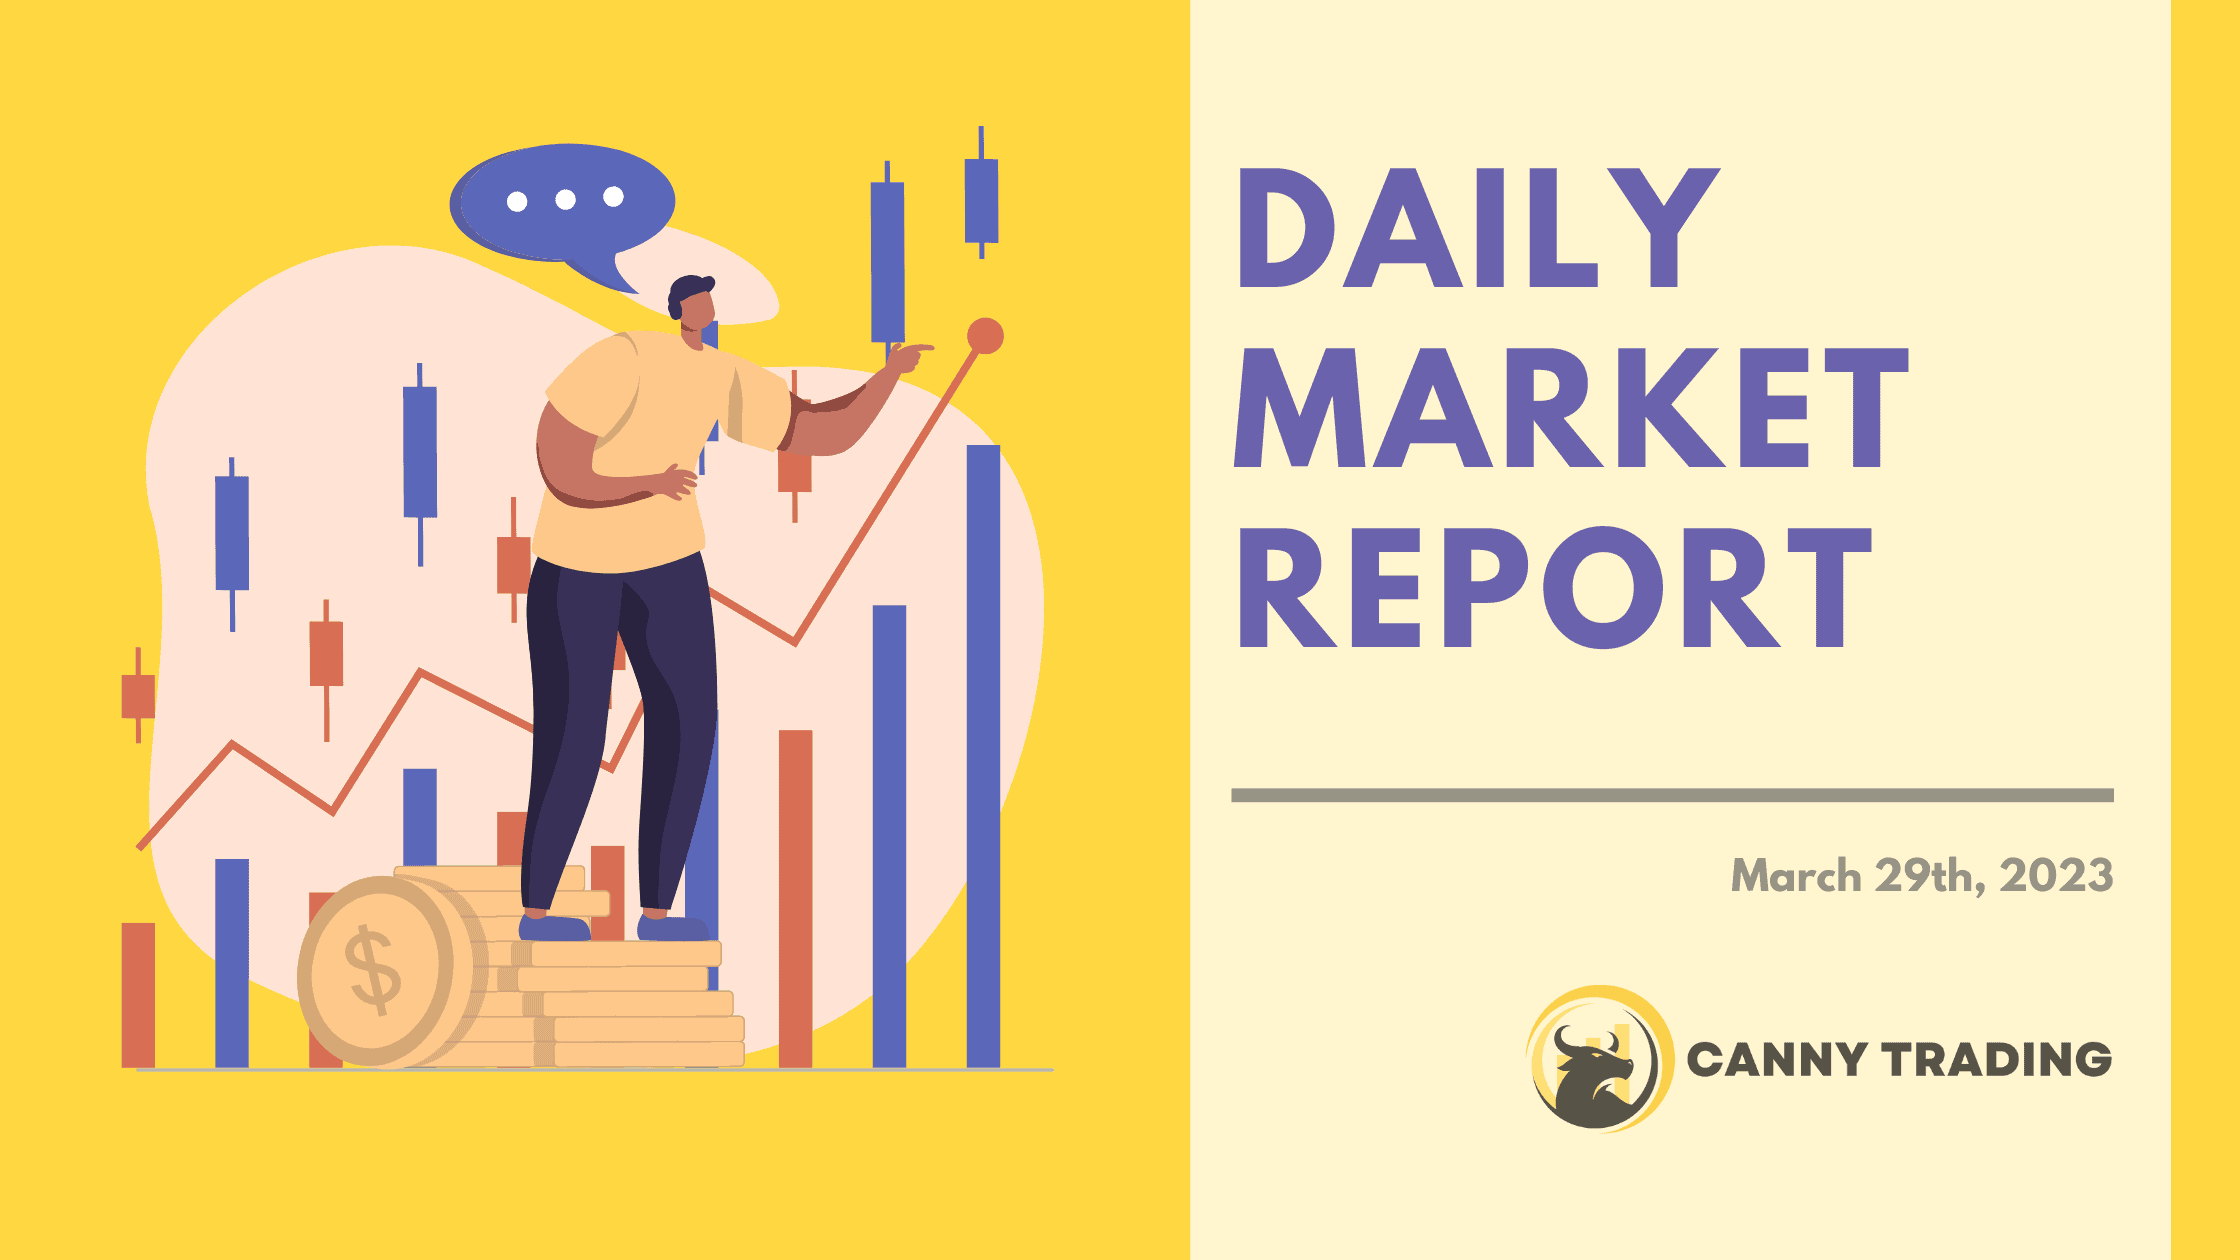 Daily Market Report March 29, 2023